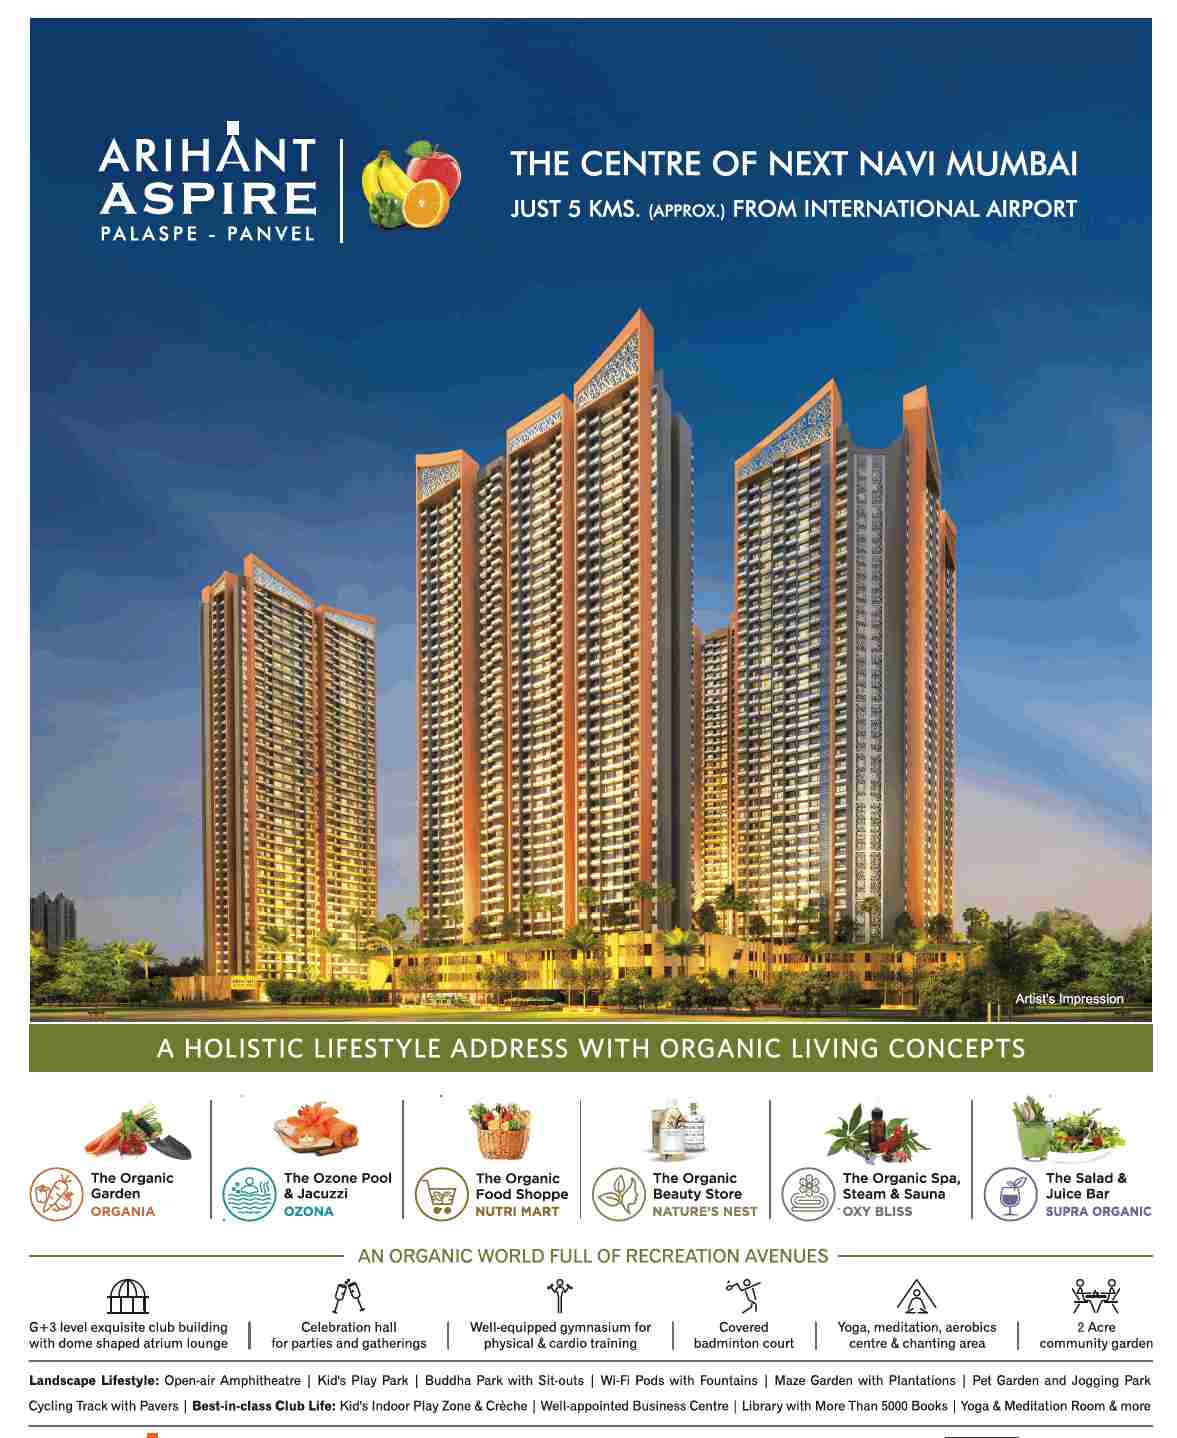 Reside in a holistic lifestyle address with organic living concepts at Arihant Aspire in Navi Mumbai Update